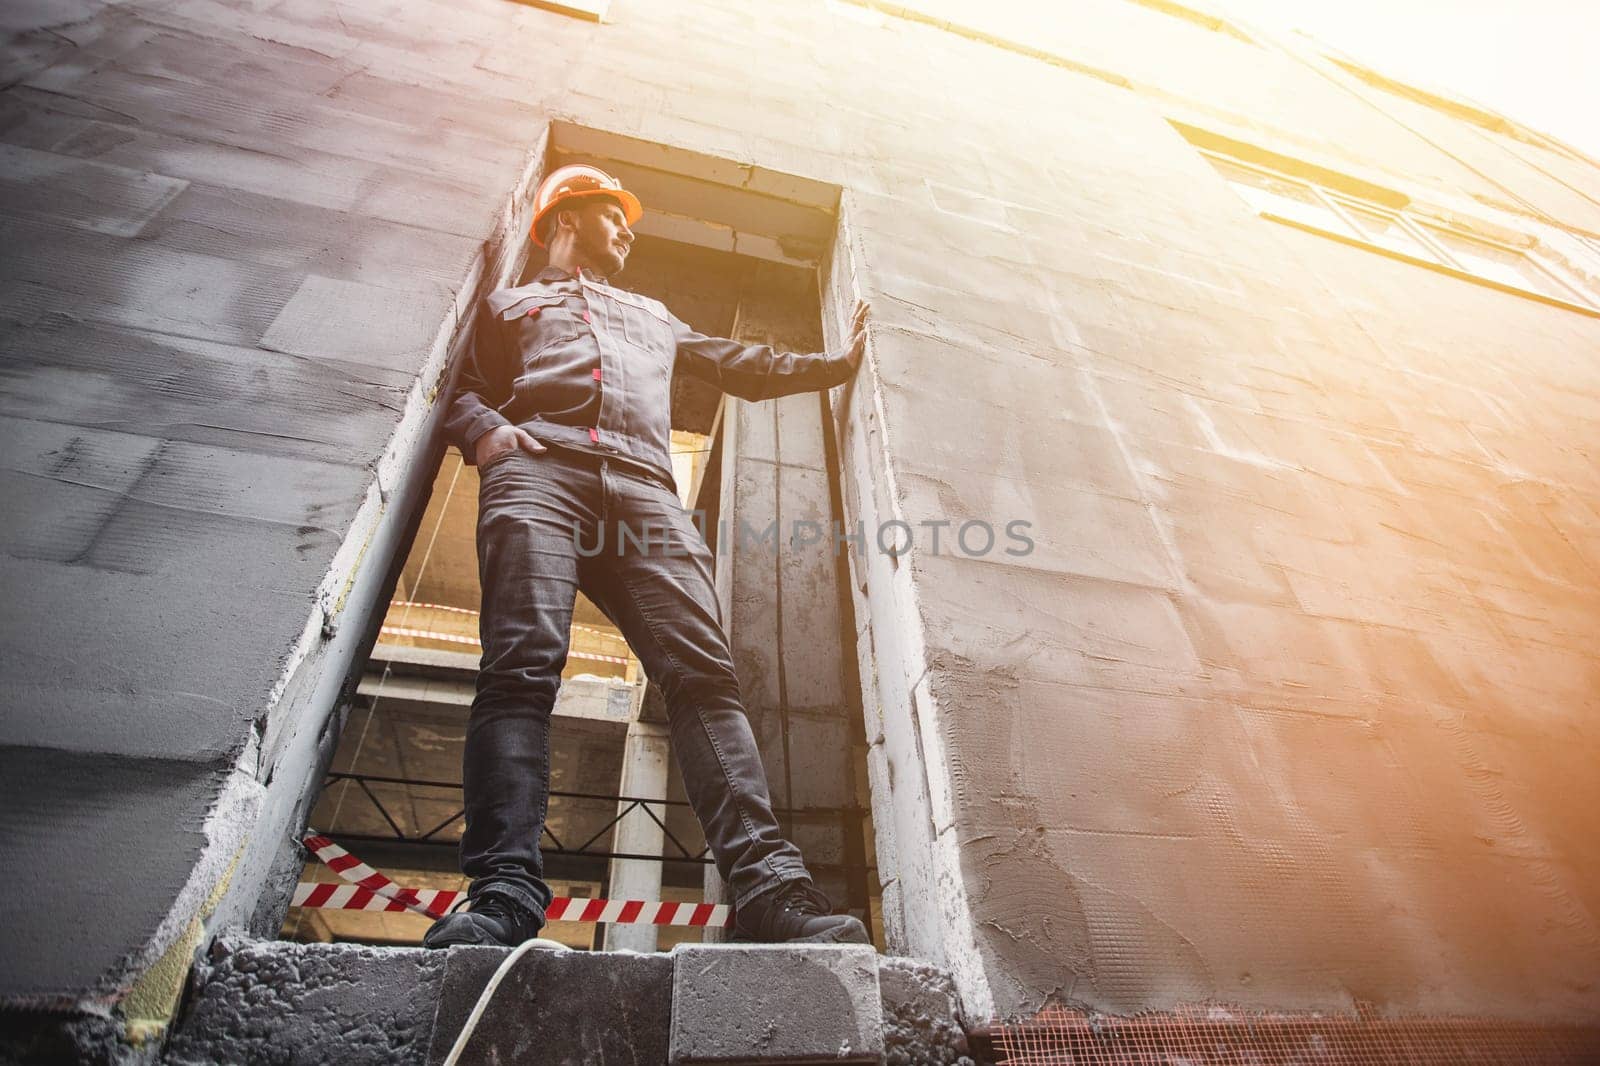 A handyman in overalls and a hard hat stands in the opening of a building under construction.